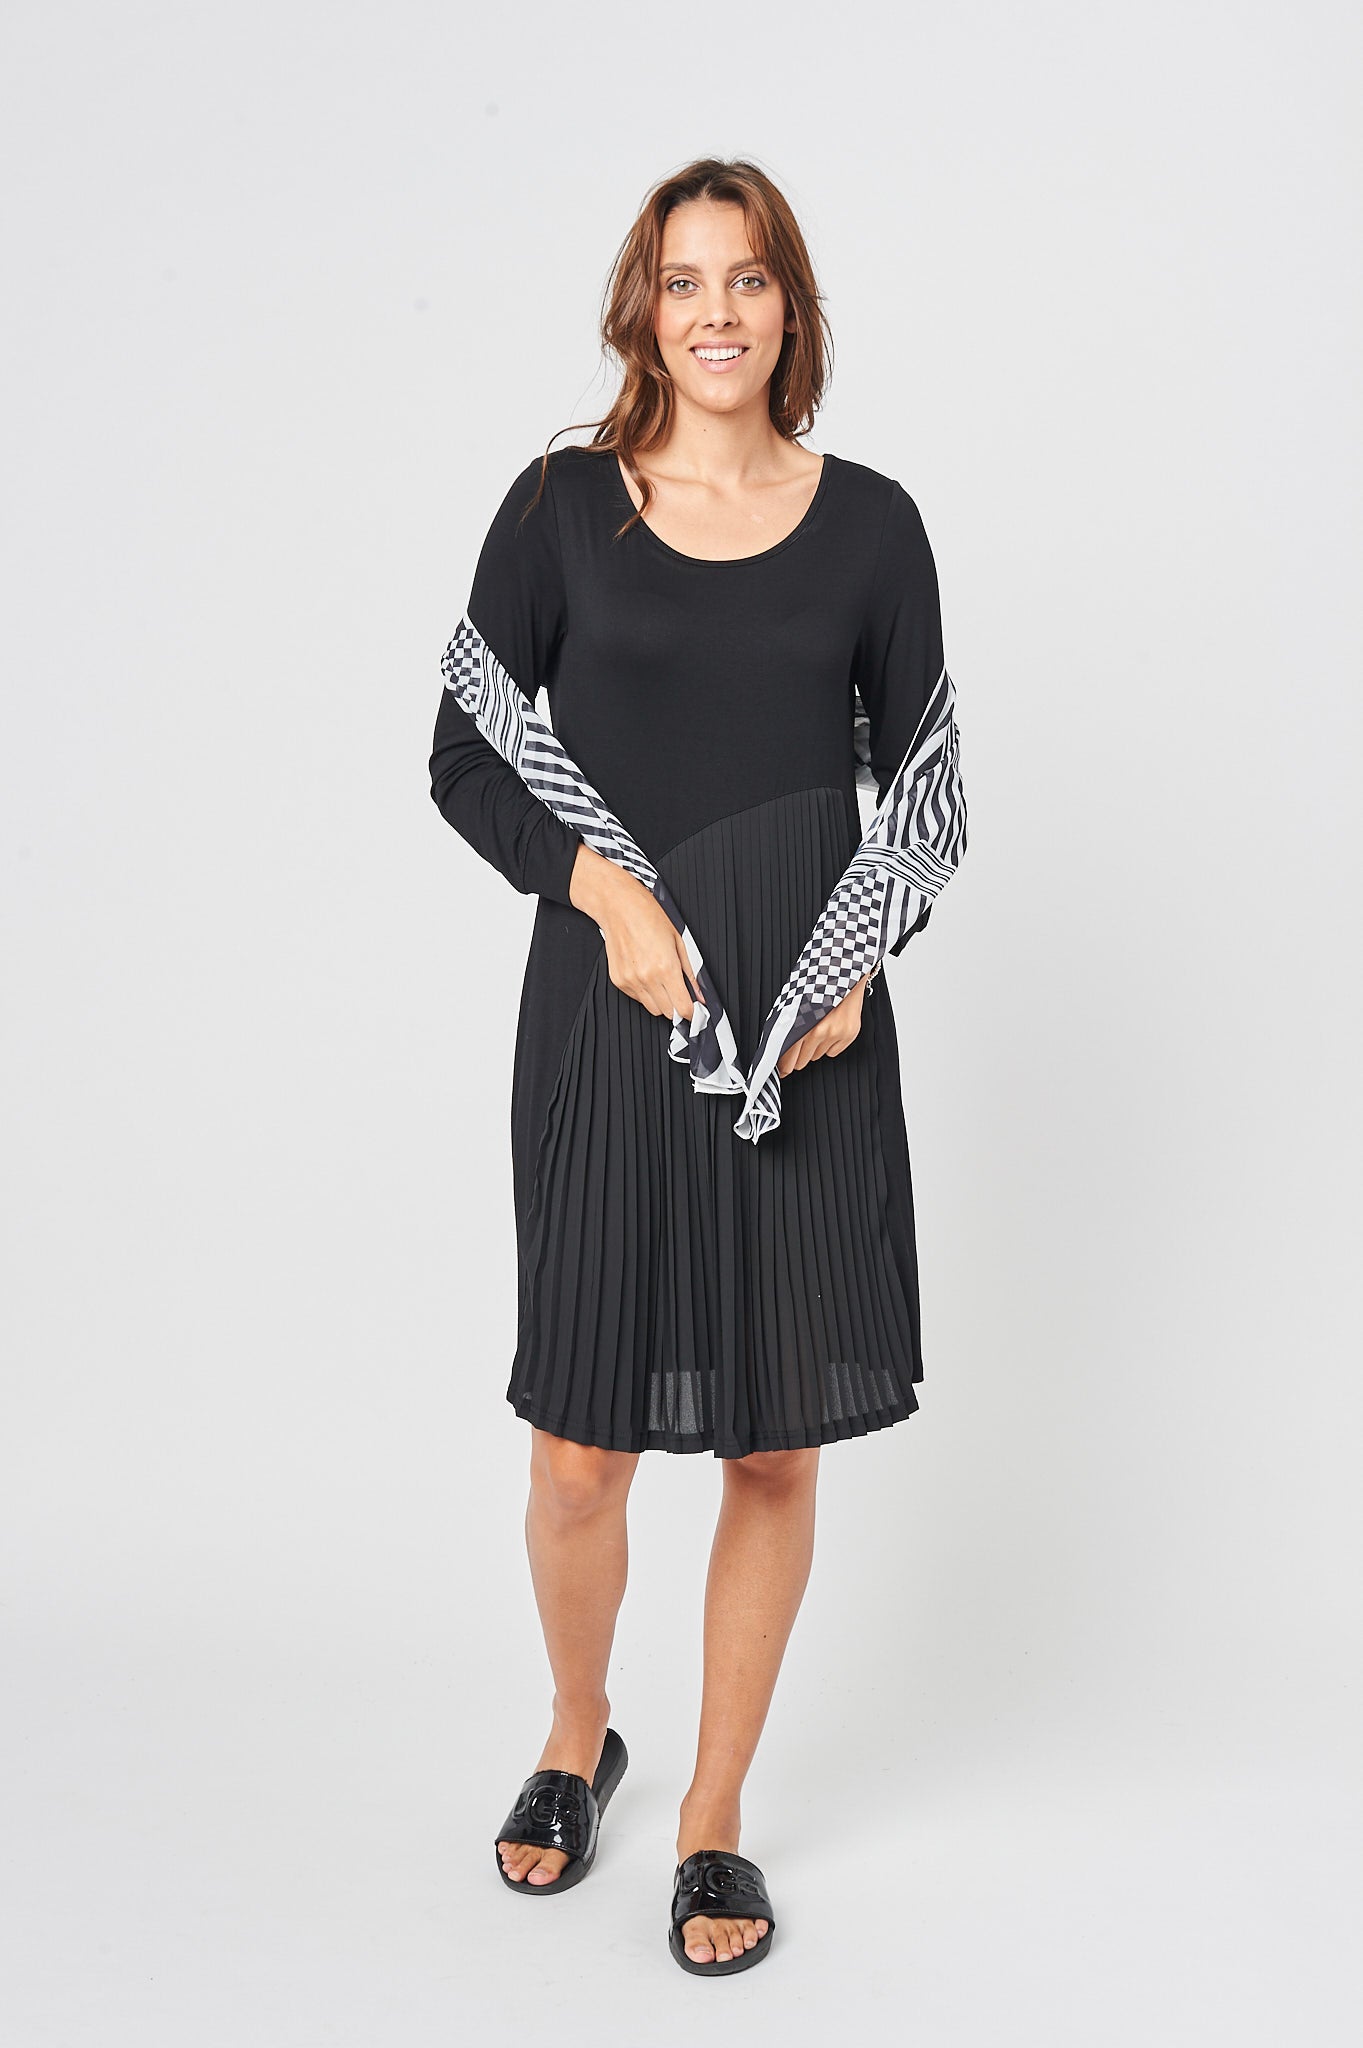 THE FEEL GOOD PLEATED DRESS IN CHARCOAL BLACK